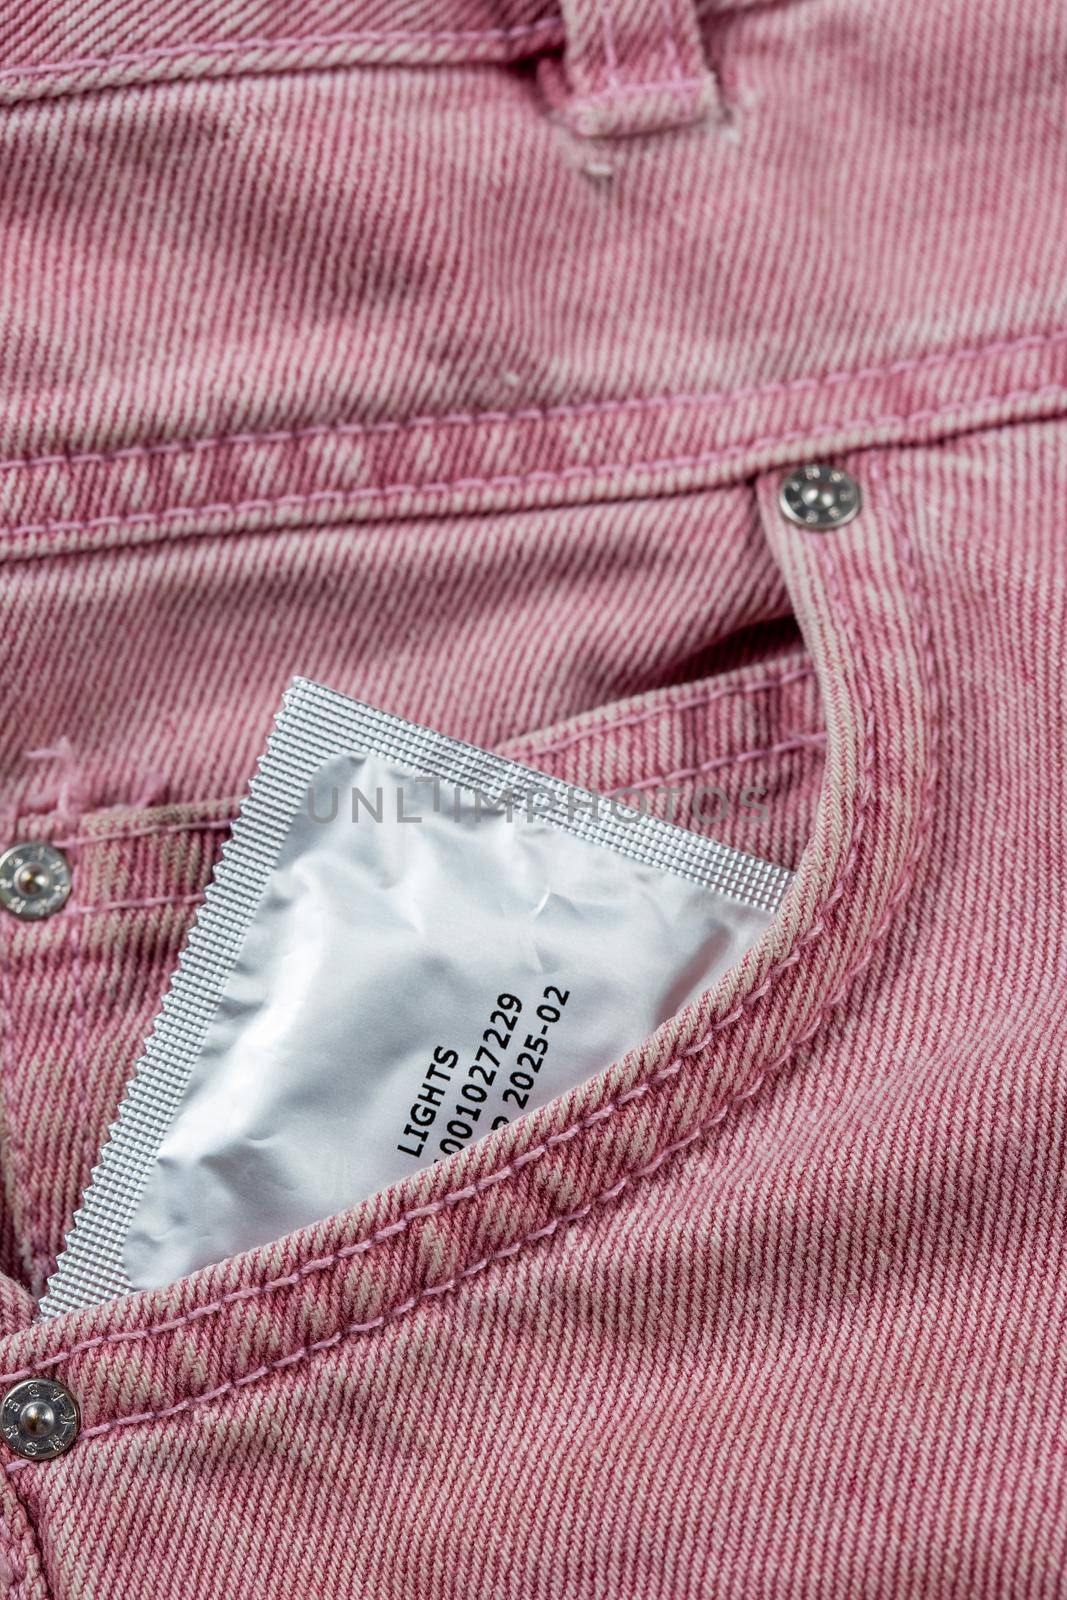 Close-up of a pocket of pink jeans from which a condom sticks out by galinasharapova